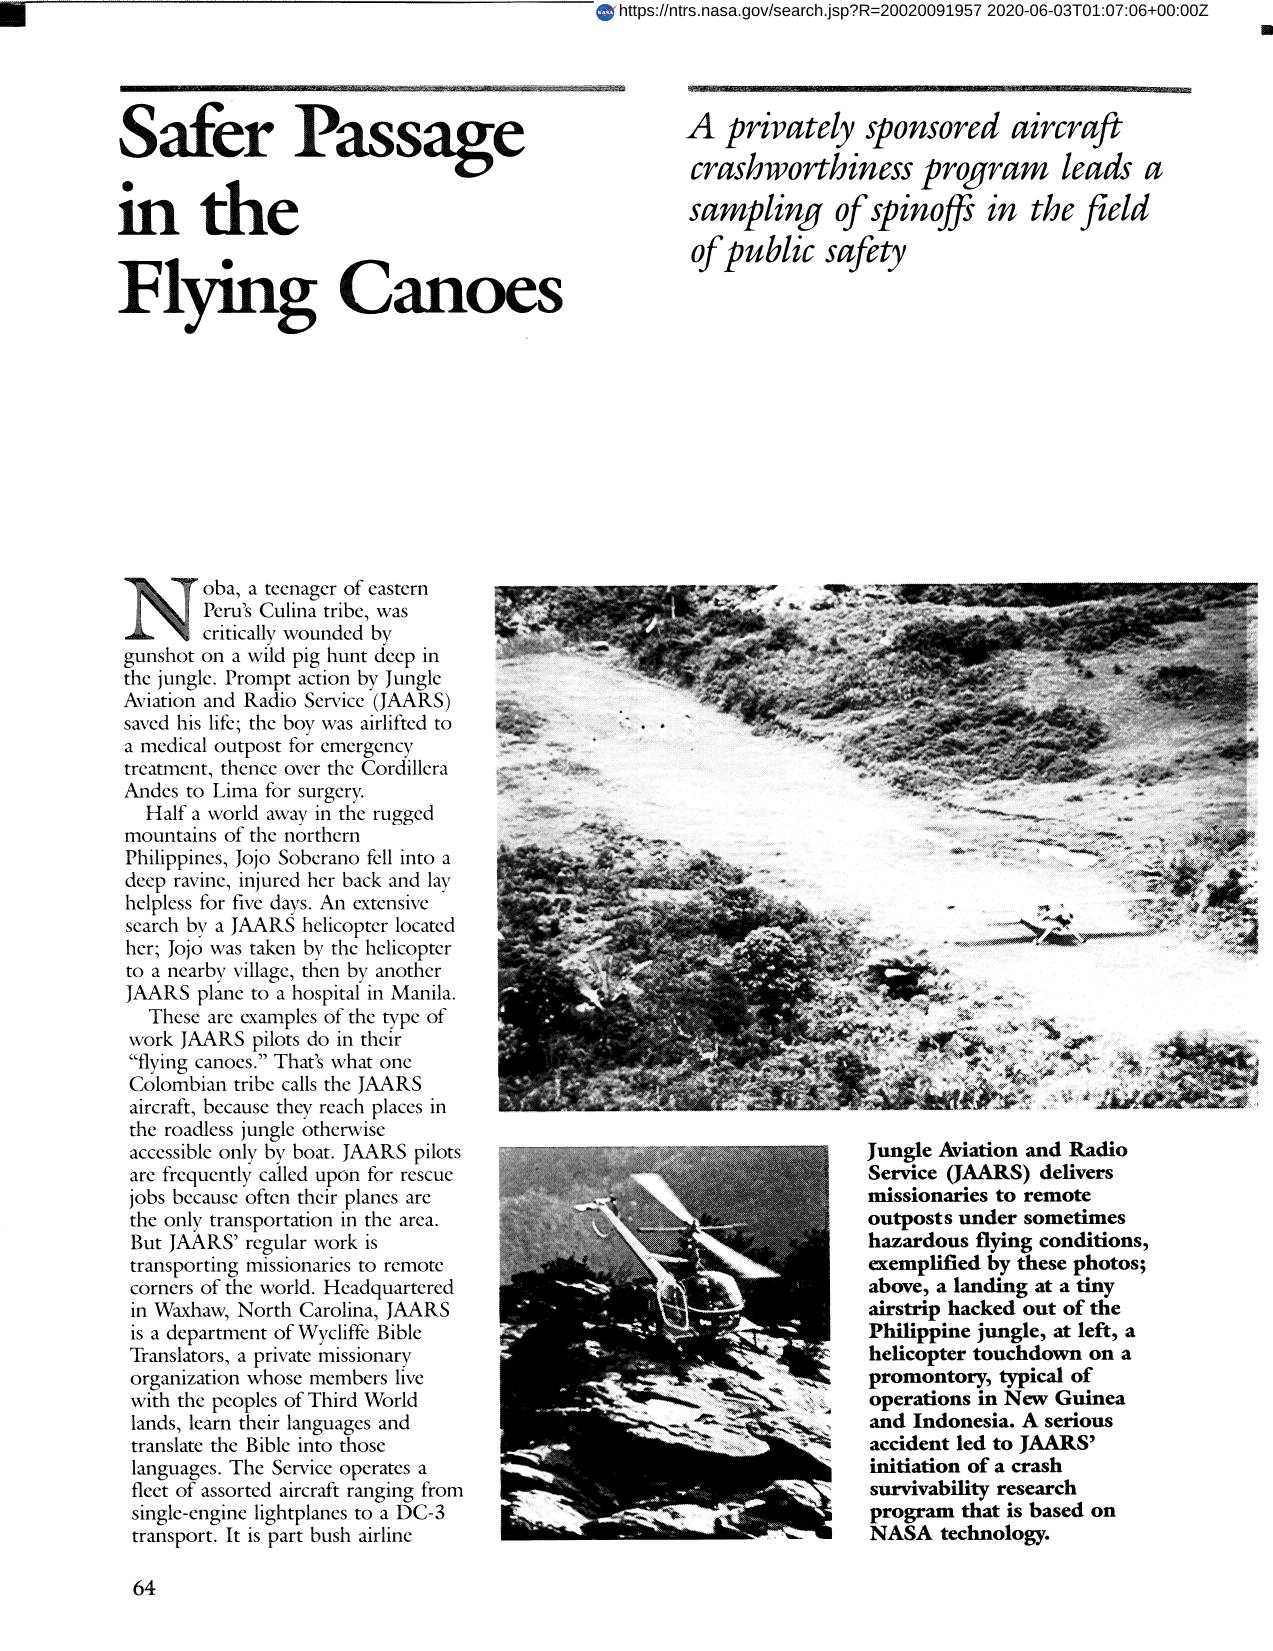 Safety Passage in the Flying Canoes